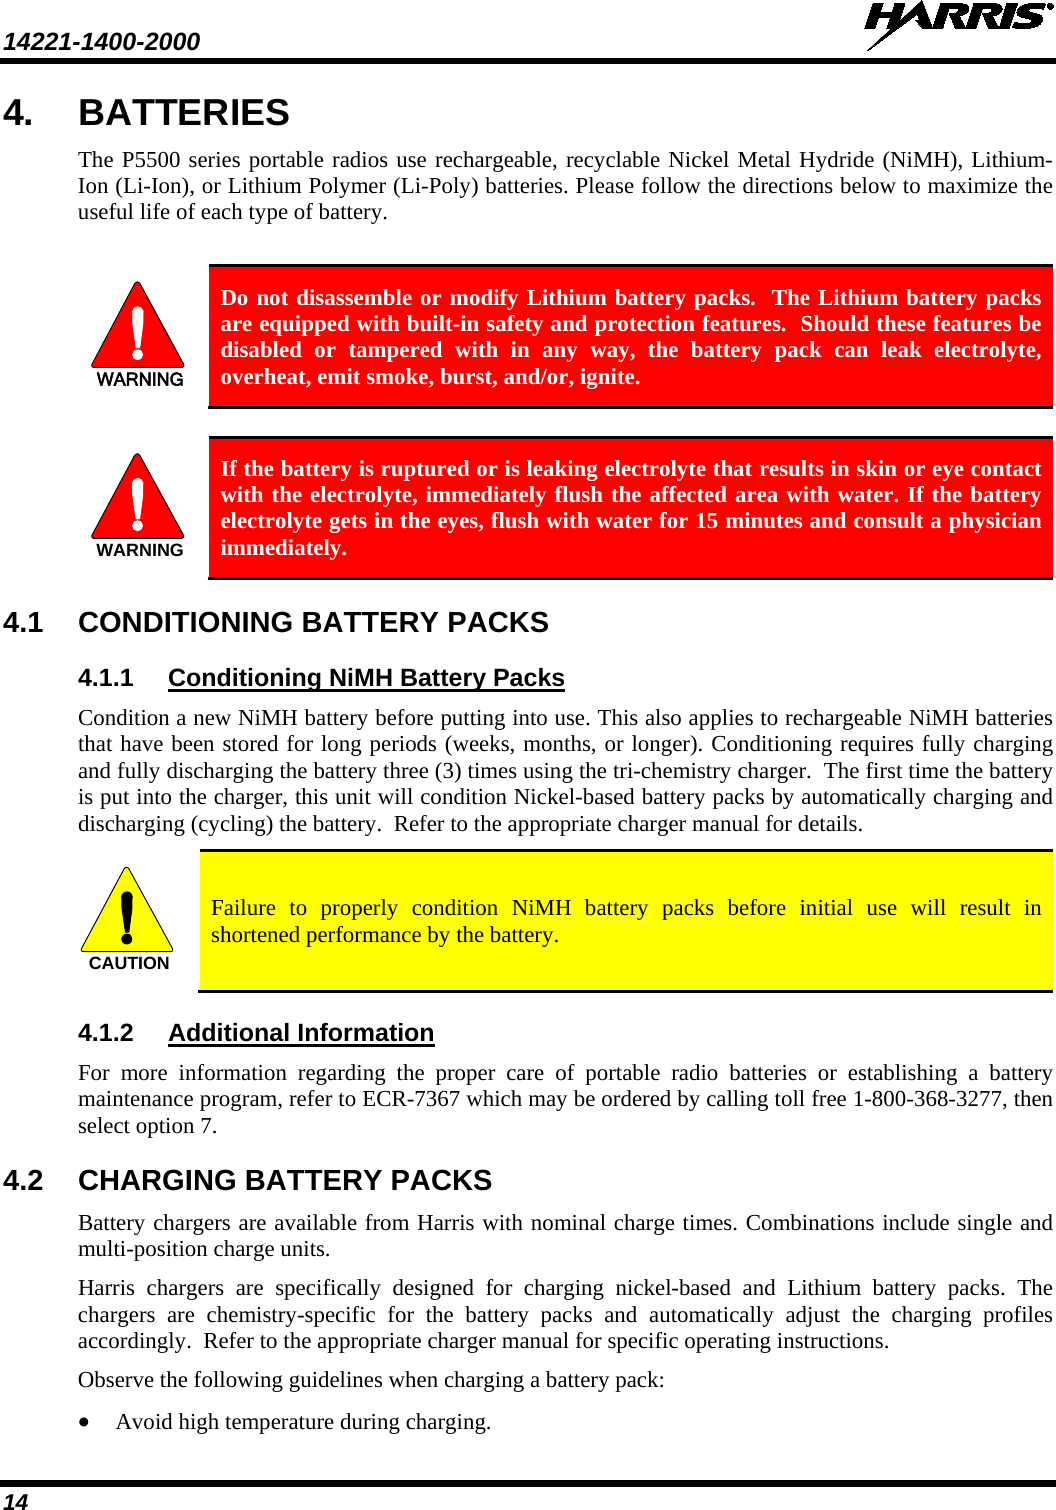 14221-1400-2000    14 4. BATTERIES The P5500 series portable radios use rechargeable, recyclable Nickel Metal Hydride (NiMH), Lithium-Ion (Li-Ion), or Lithium Polymer (Li-Poly) batteries. Please follow the directions below to maximize the useful life of each type of battery.  WARNING Do not disassemble or modify Lithium battery packs.  The Lithium battery packs are equipped with built-in safety and protection features.  Should these features be disabled or tampered with in any way, the battery pack can leak electrolyte, overheat, emit smoke, burst, and/or, ignite.  WARNING If the battery is ruptured or is leaking electrolyte that results in skin or eye contact with the electrolyte, immediately flush the affected area with water. If the battery electrolyte gets in the eyes, flush with water for 15 minutes and consult a physician immediately. 4.1 CONDITIONING BATTERY PACKS 4.1.1 Condition a new NiMH battery before putting into use. This also applies to rechargeable NiMH batteries that have been stored for long periods (weeks, months, or longer). Conditioning requires fully charging and fully discharging the battery three (3) times using the tri-chemistry charger.  The first time the battery is put into the charger, this unit will condition Nickel-based battery packs by automatically charging and discharging (cycling) the battery.  Refer to the appropriate charger manual for details. Conditioning NiMH Battery Packs CAUTION Failure to properly condition NiMH battery packs before initial use will result in shortened performance by the battery. 4.1.2 For more information regarding the proper care of portable radio batteries or establishing a battery maintenance program, refer to ECR-7367 which may be ordered by calling toll free 1-800-368-3277, then select option 7. Additional Information 4.2 CHARGING BATTERY PACKS Battery chargers are available from Harris with nominal charge times. Combinations include single and multi-position charge units.  Harris chargers are specifically designed for charging nickel-based and Lithium  battery packs. The chargers are  chemistry-specific for the battery packs and automatically adjust the charging profiles accordingly.  Refer to the appropriate charger manual for specific operating instructions.  Observe the following guidelines when charging a battery pack: • Avoid high temperature during charging.  